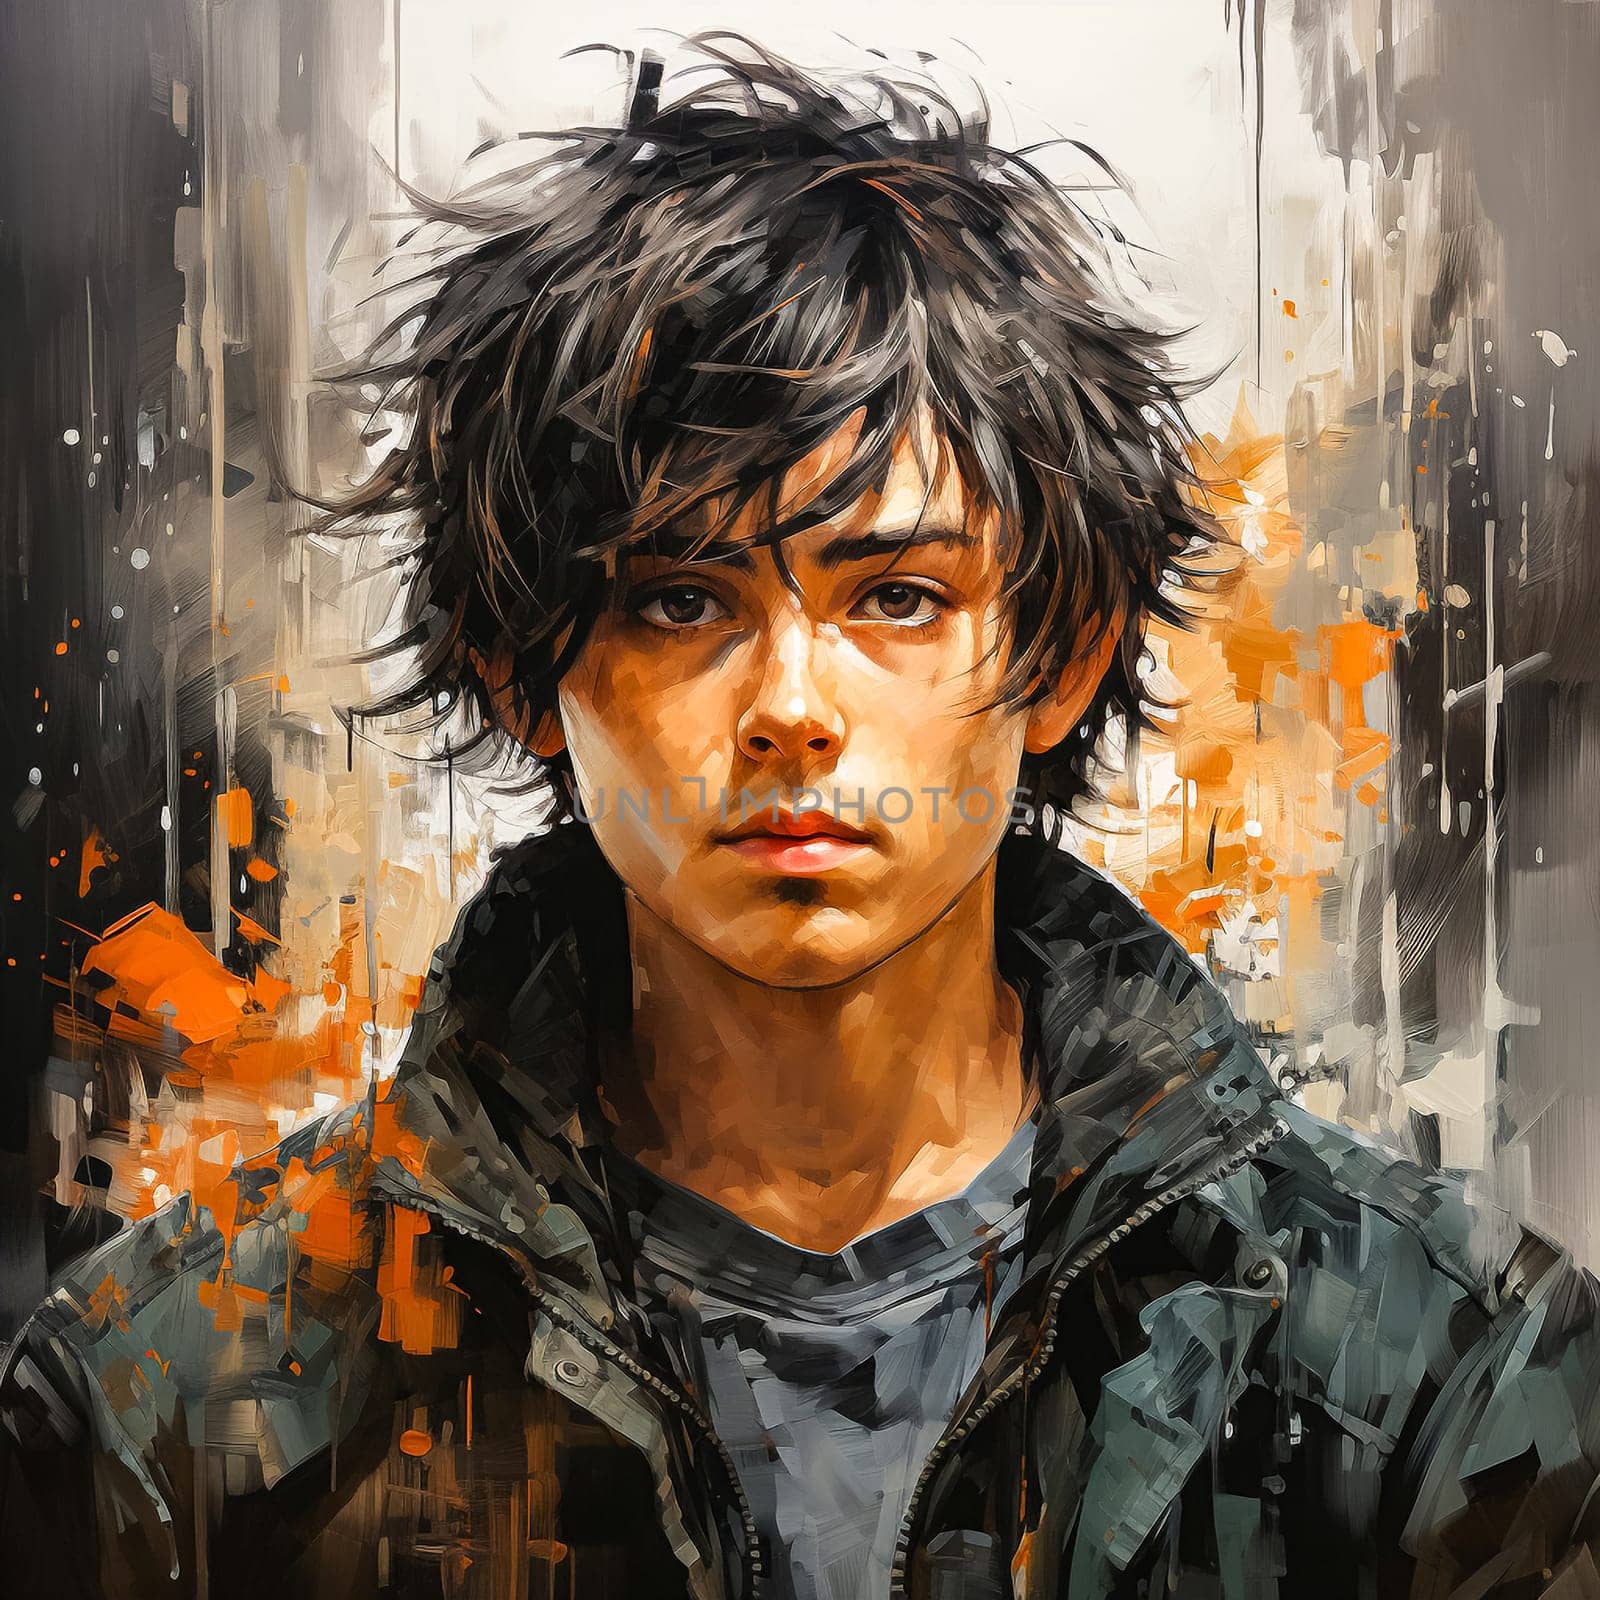 A captivating watercolor illustration showcasing the character and spirit of a young man